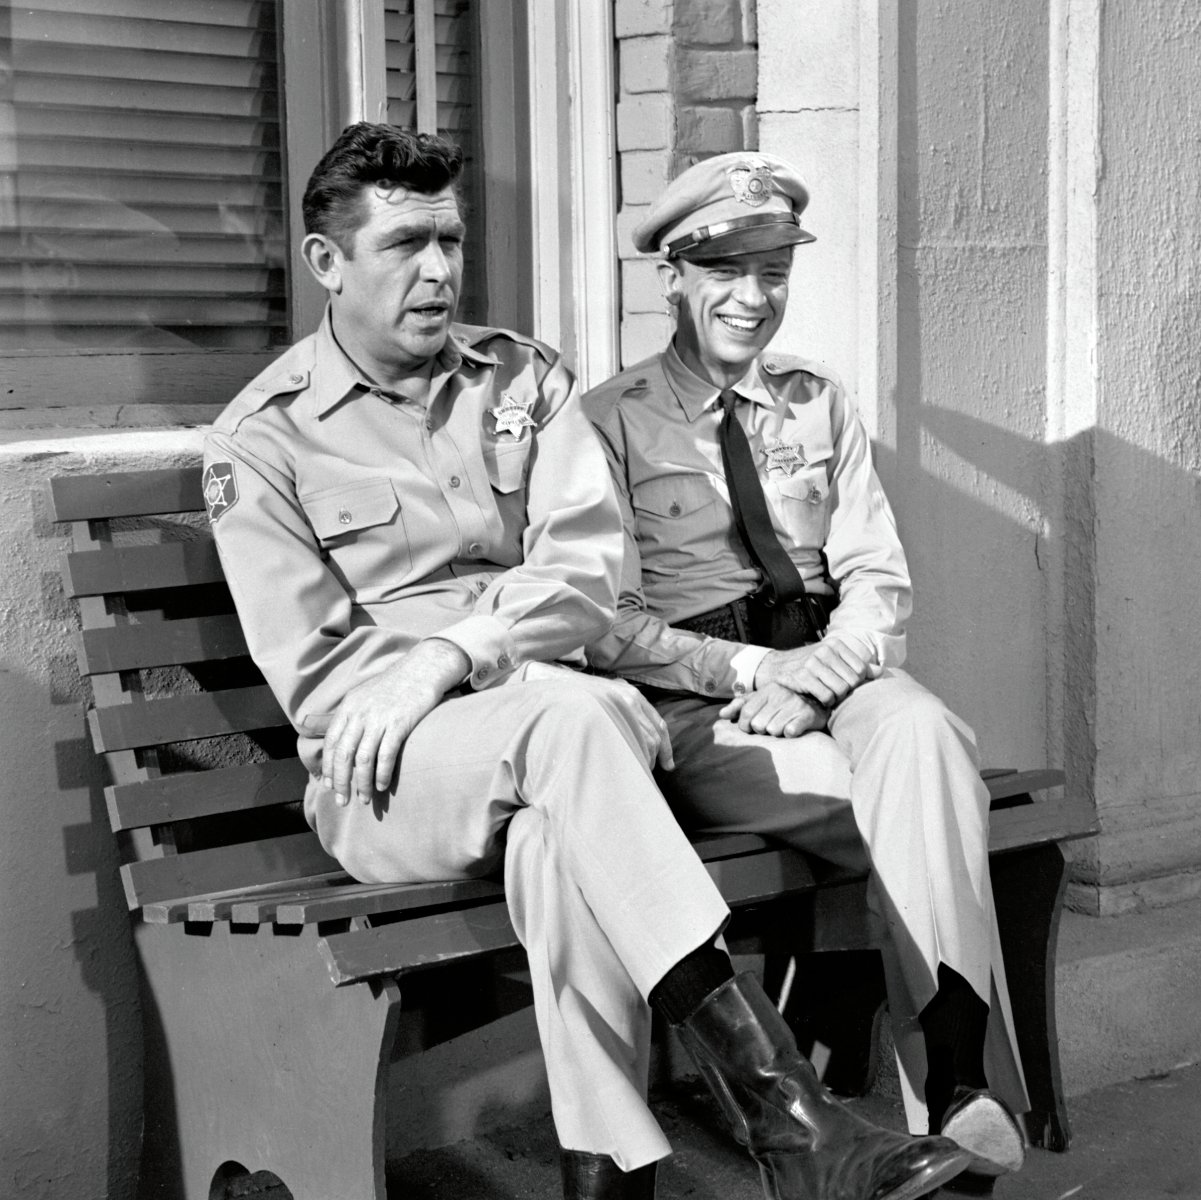 Left to right: Actors Andy Griffith and Don Knotts in a scene from 'The Andy Griffith Show'